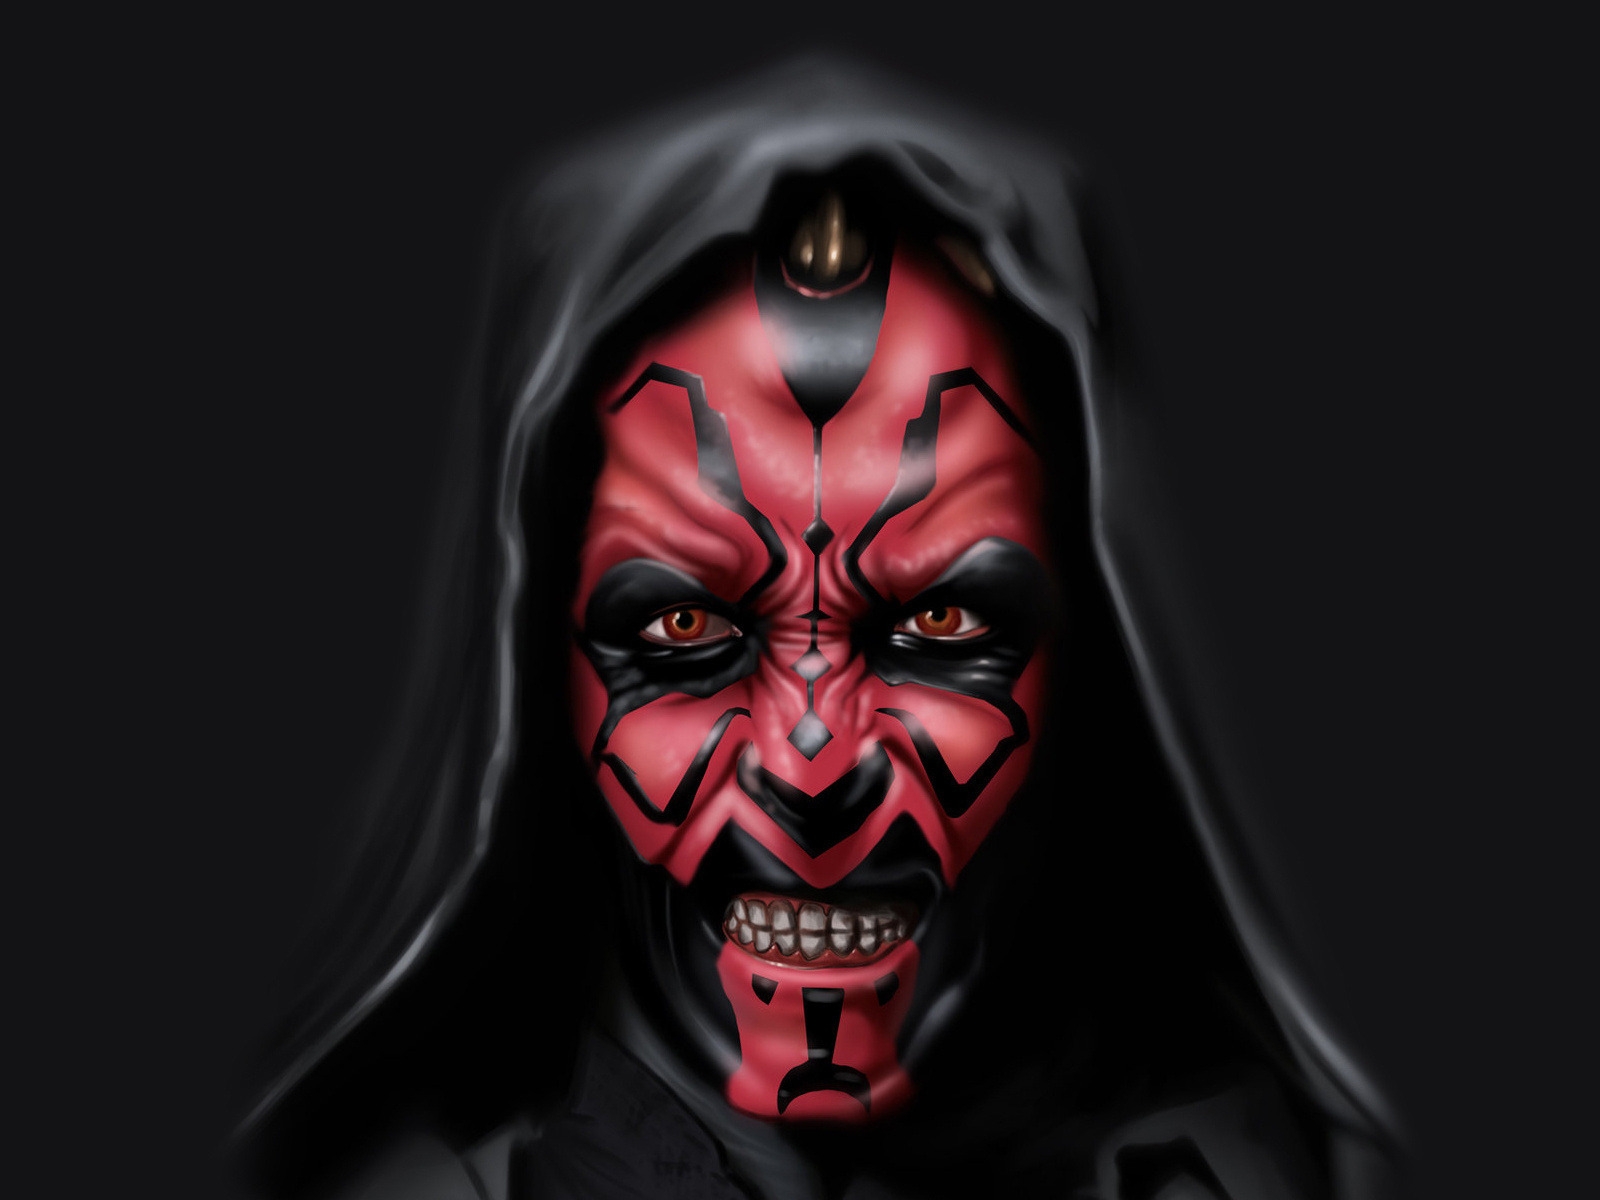 Darth Vader Animated for 1600 x 1200 resolution